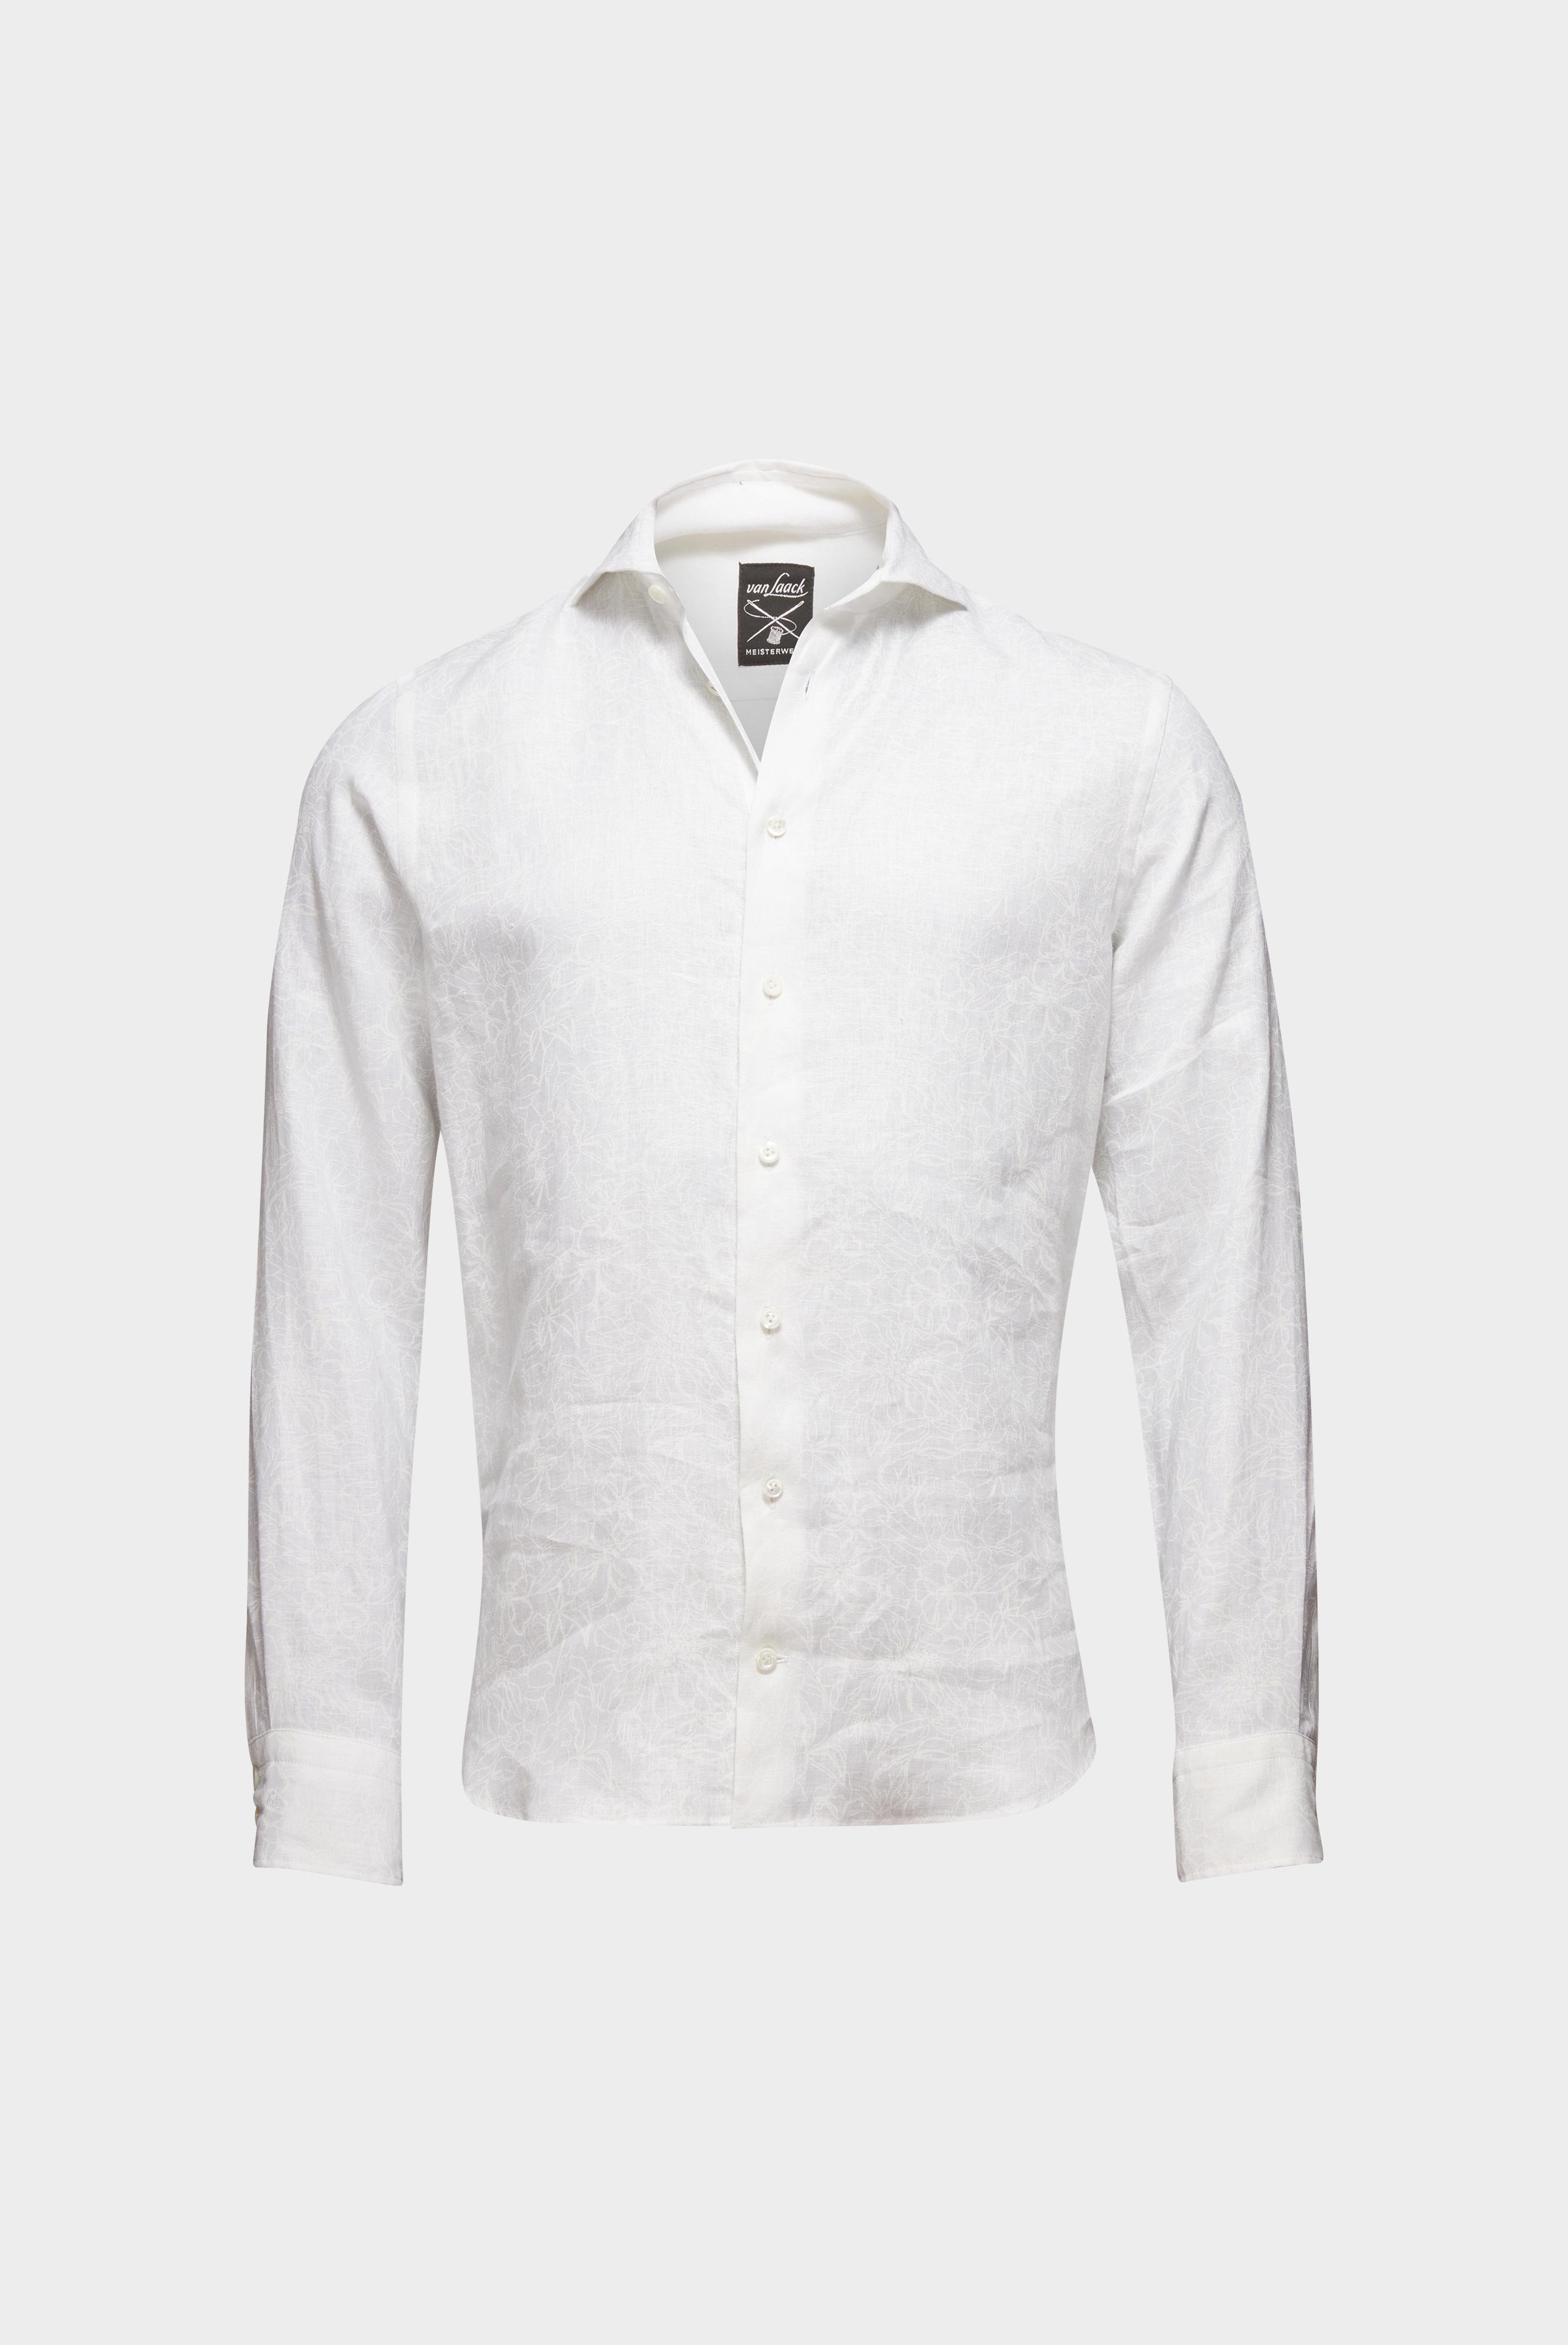 Casual Shirts+White-on-White Printed Linen Shirt Tailor Fit+20.2016.9V.170351.000.38